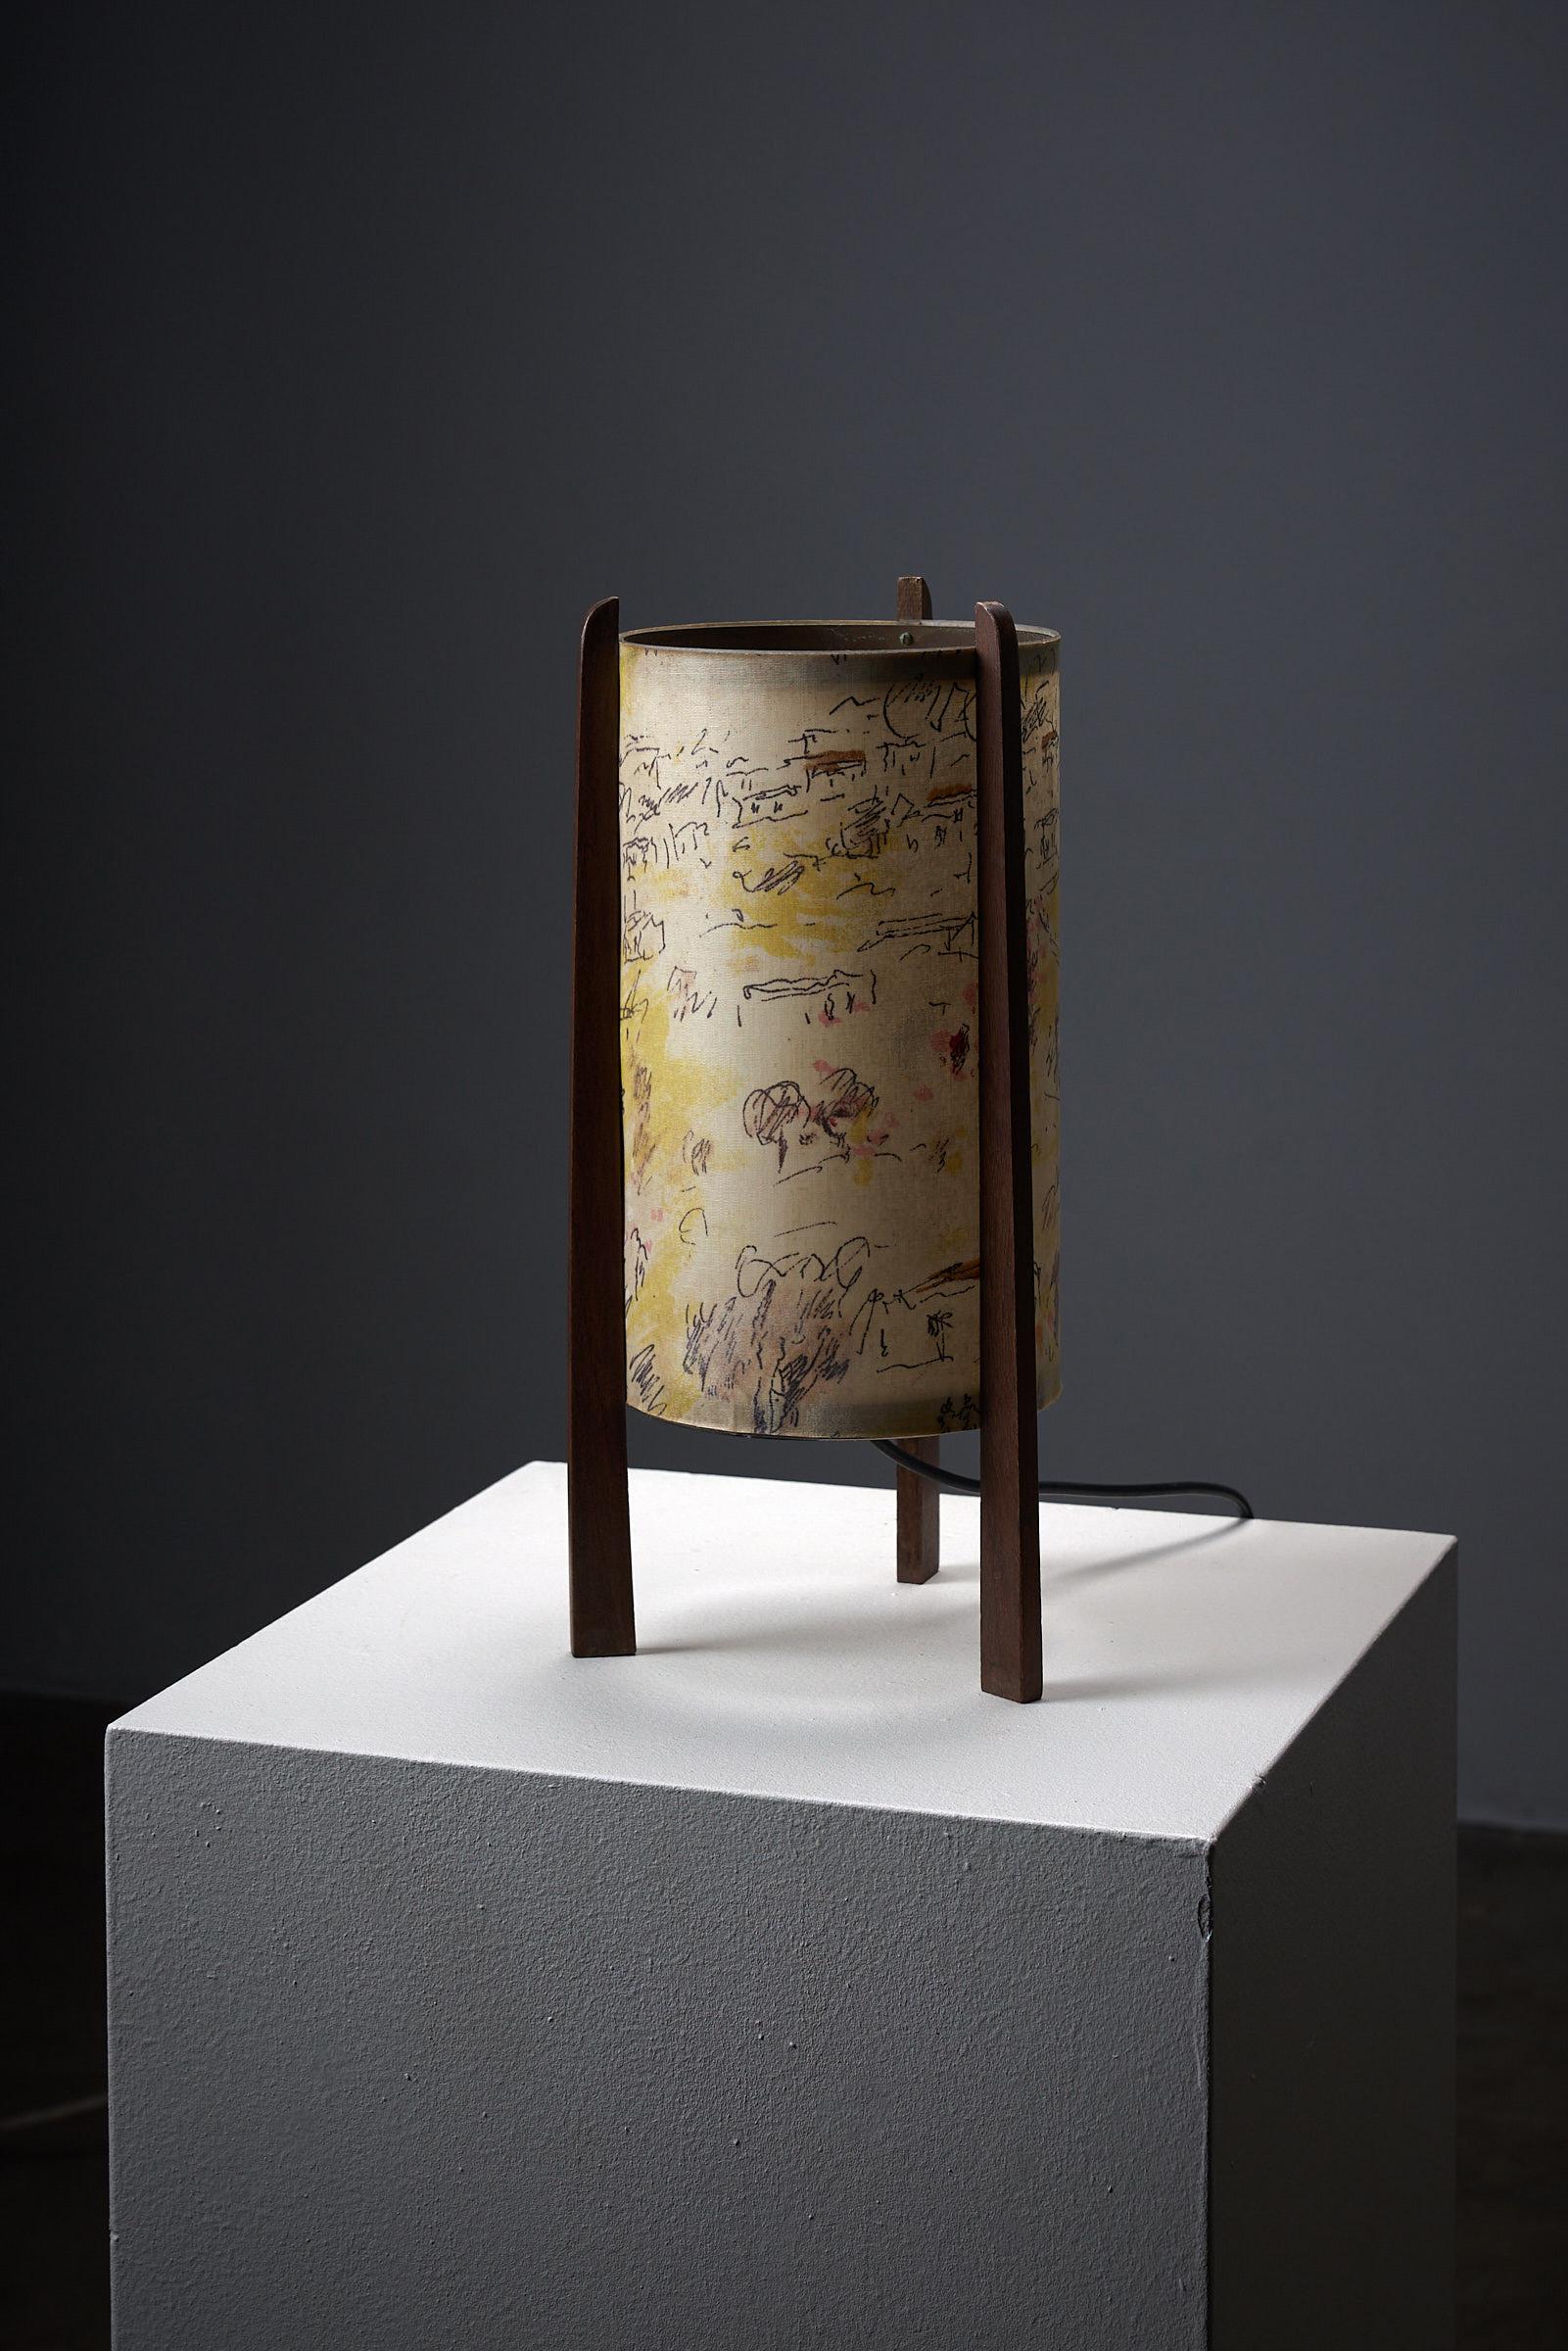 Introducing a one-of-a-kind table lamp by the renowned painter Michele Cascella, a true masterpiece that transcends the boundaries between art and functional design. This unique creation captivates with its simplicity, showcasing a painted shade